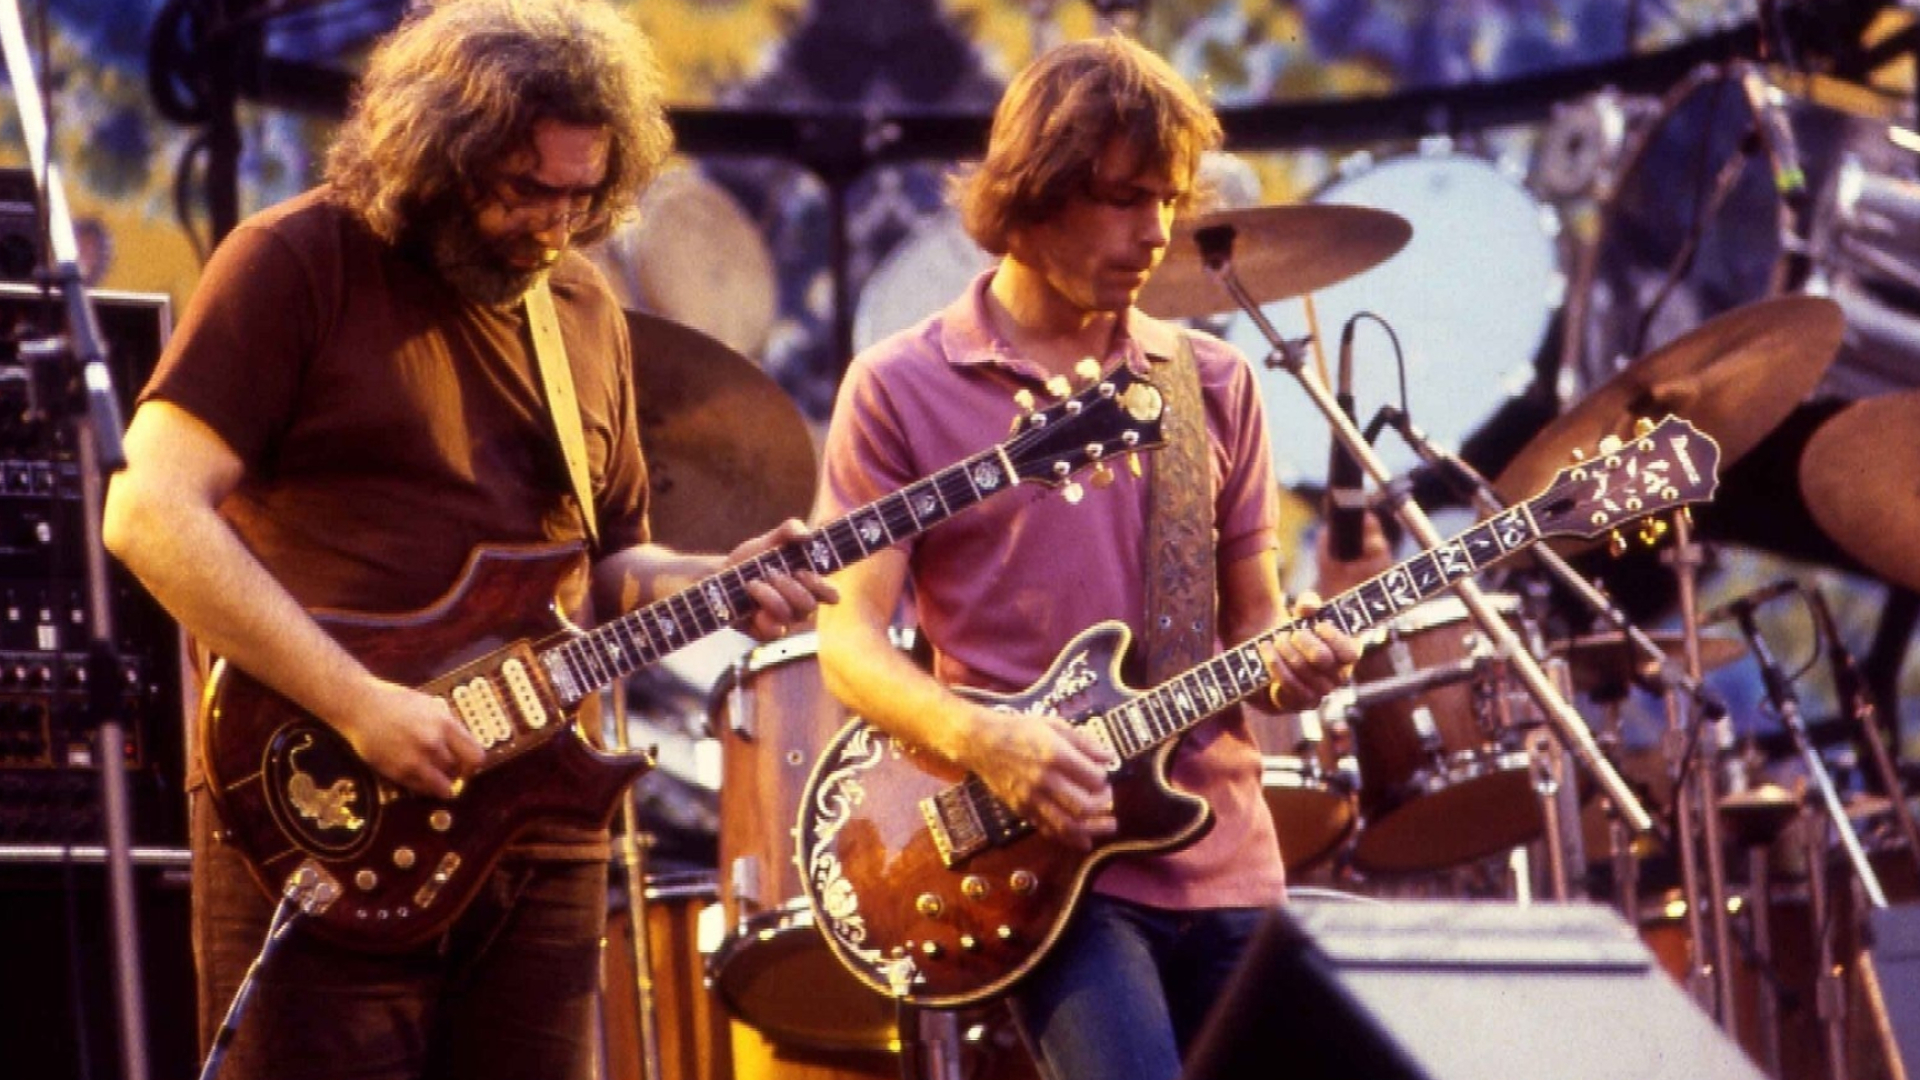 Grateful Dead: Jerry Garcia and Bob Weir, 1977, A vintage live concert. 1920x1080 Full HD Background.